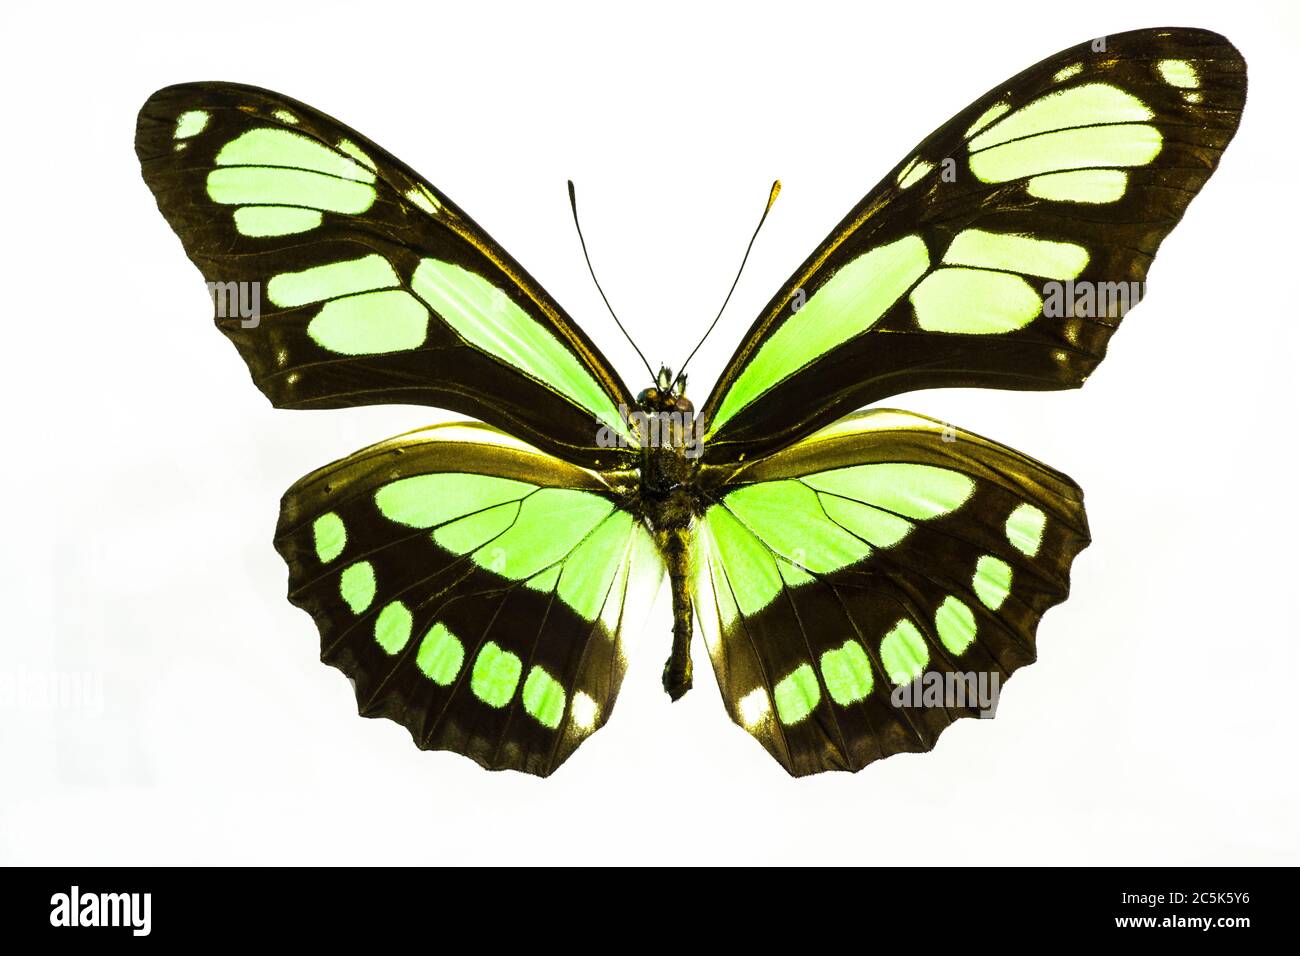 Beautiful lime green and black butterfly isolated on a white background.  The species is Philaethria Dido Longwing from South America. Stock Photo